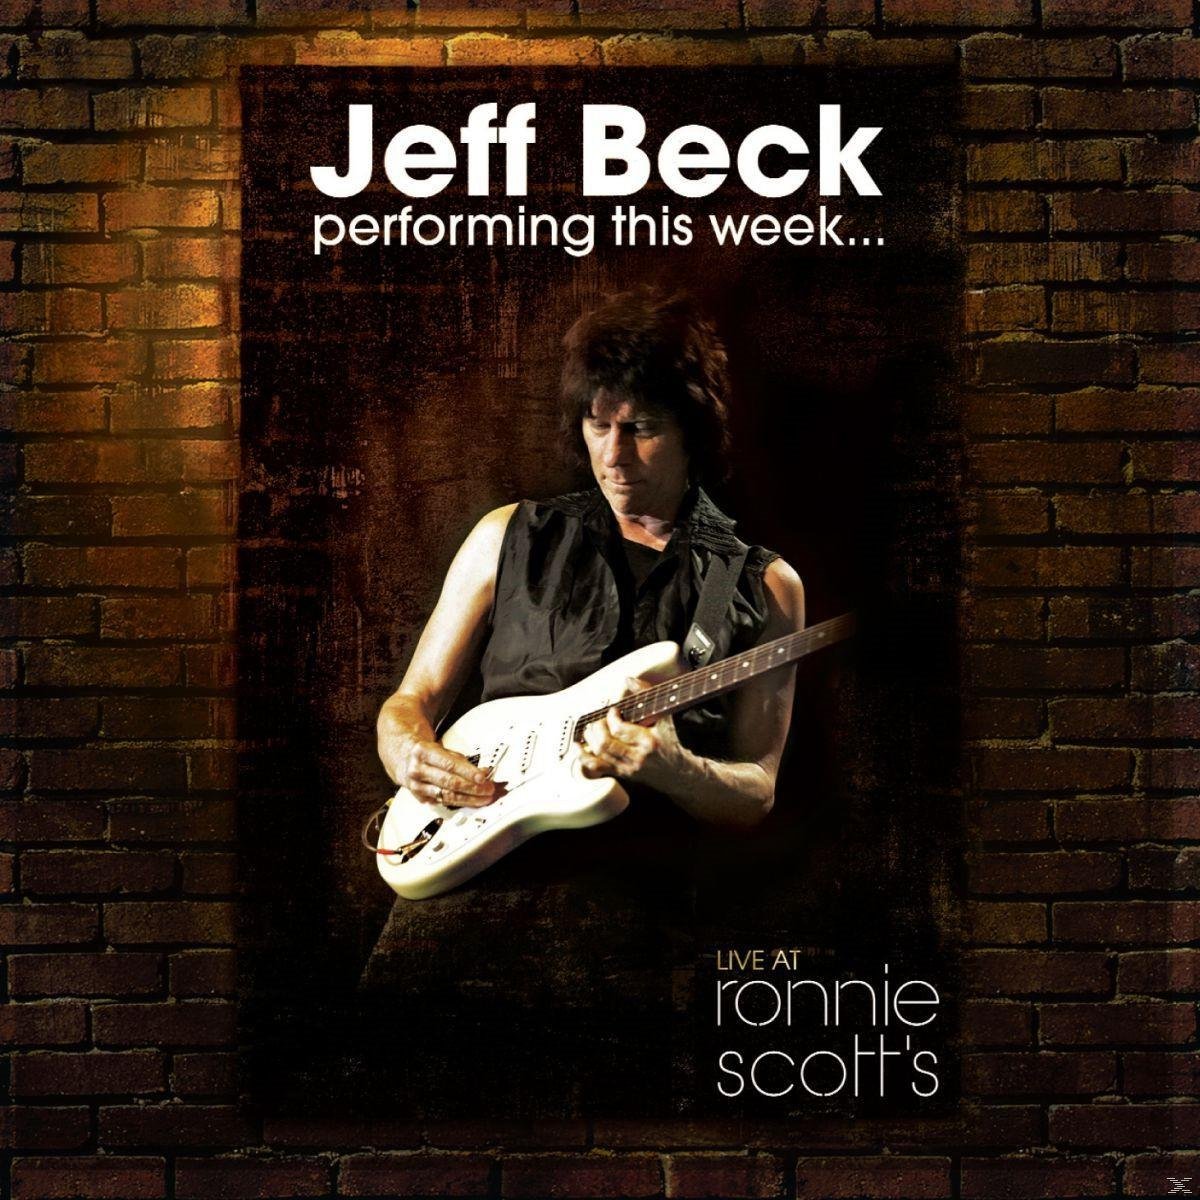 This - At (CD) Jeff Ronnie - Beck Performing Week-Live Scott\'s